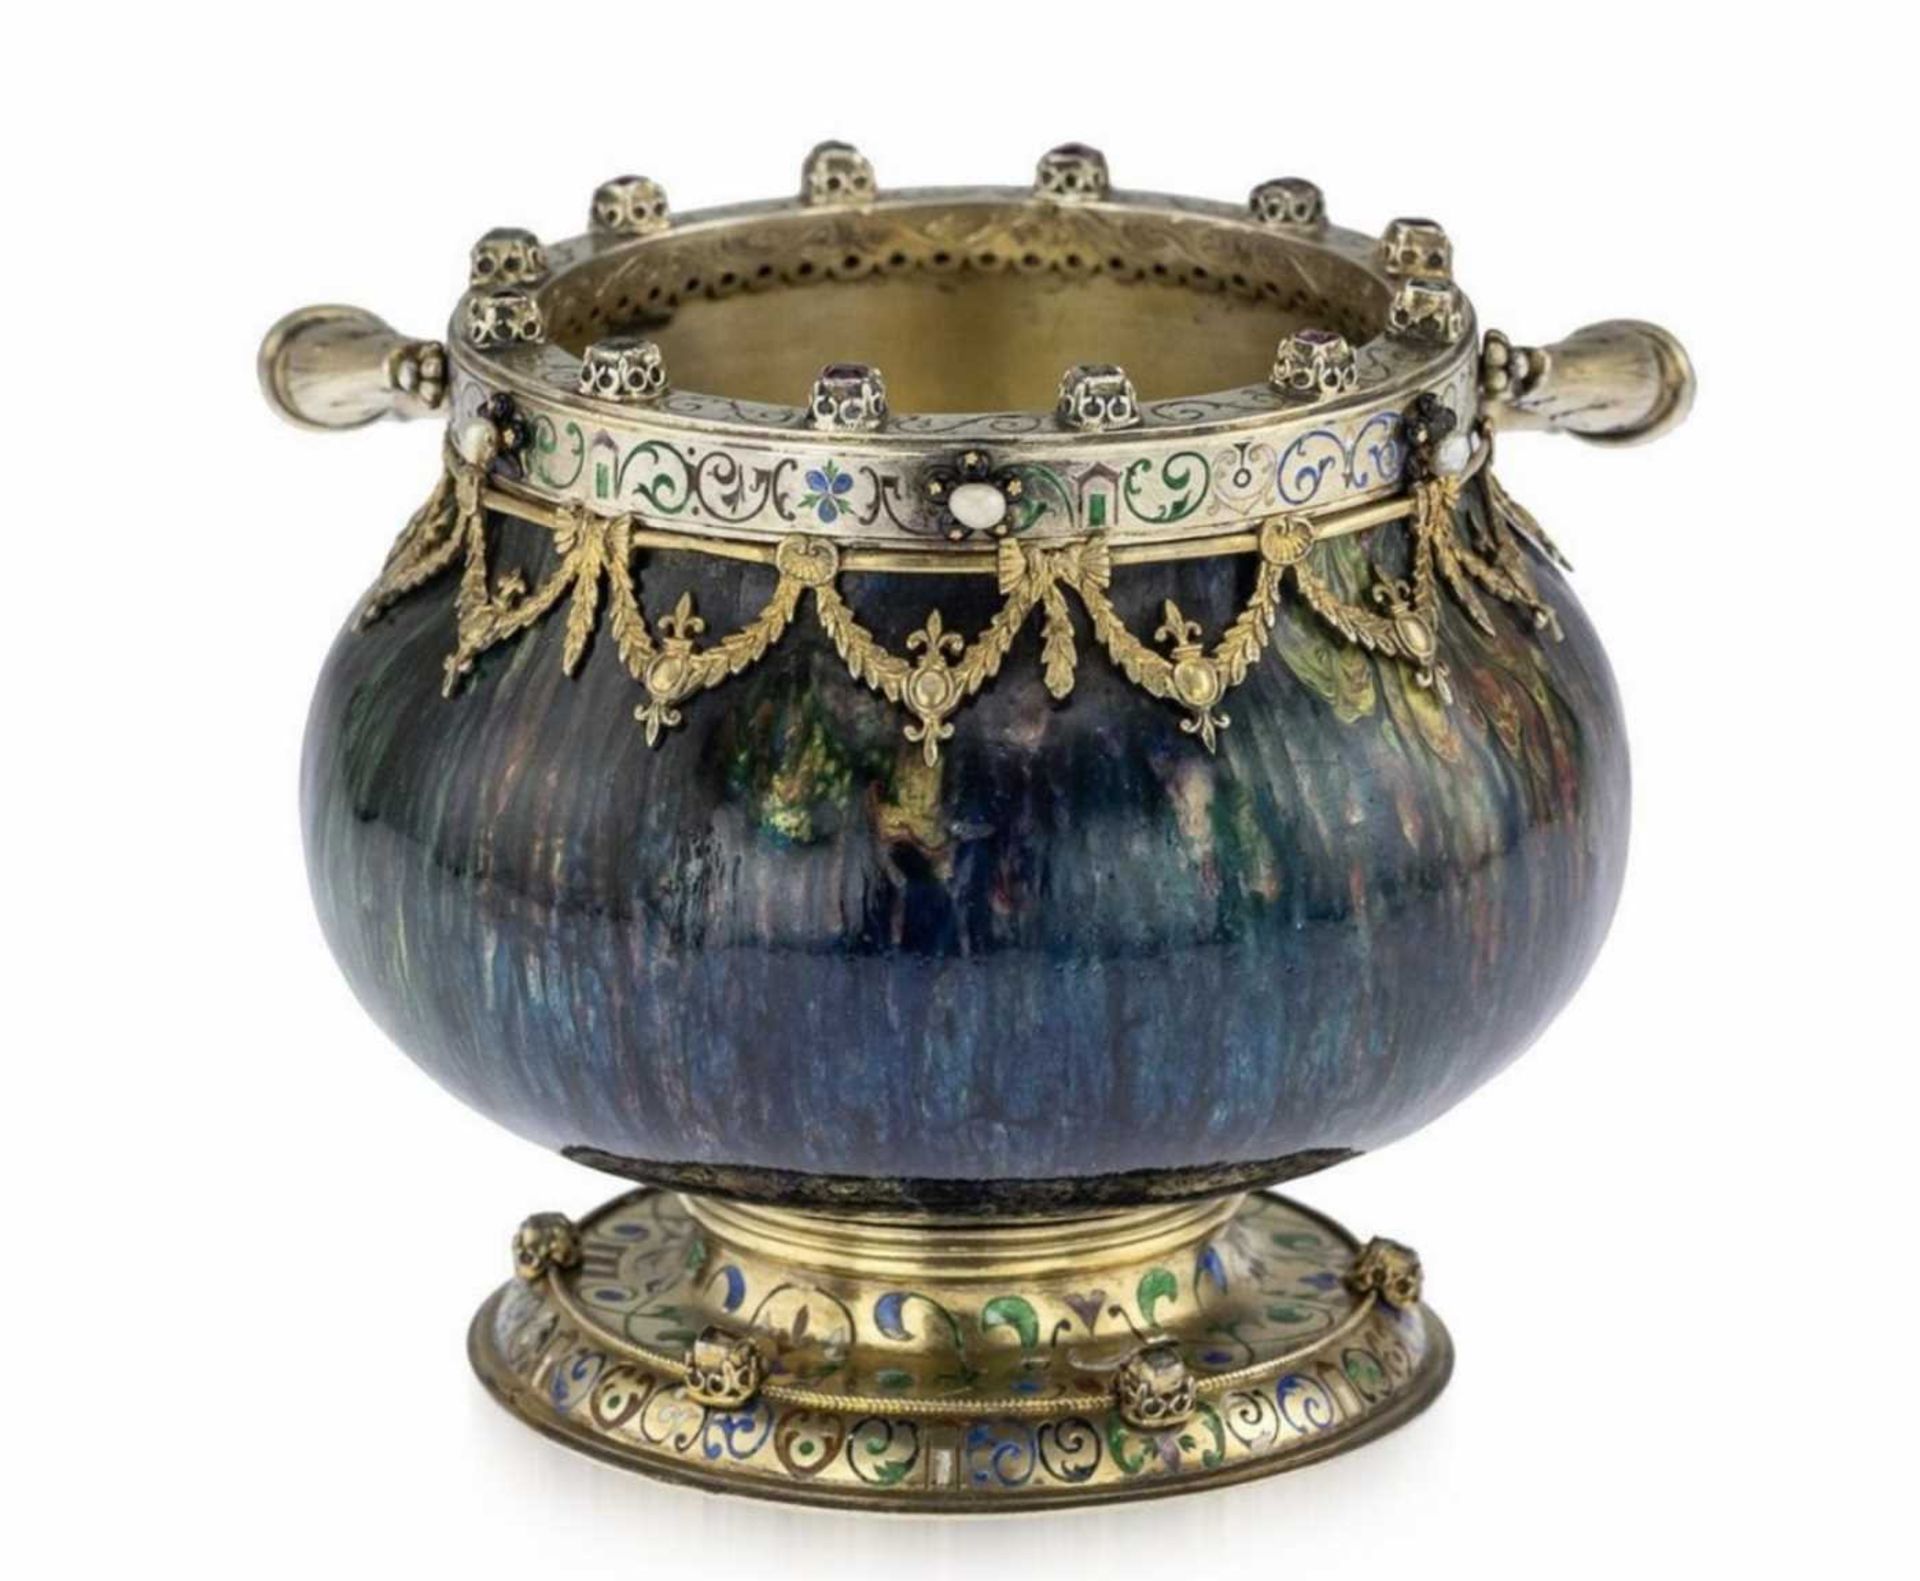 A 19TH CENTURY SILVER GILT AND ENAMELLED VASE, AUSTRO-HUNGARIAN - Image 3 of 10